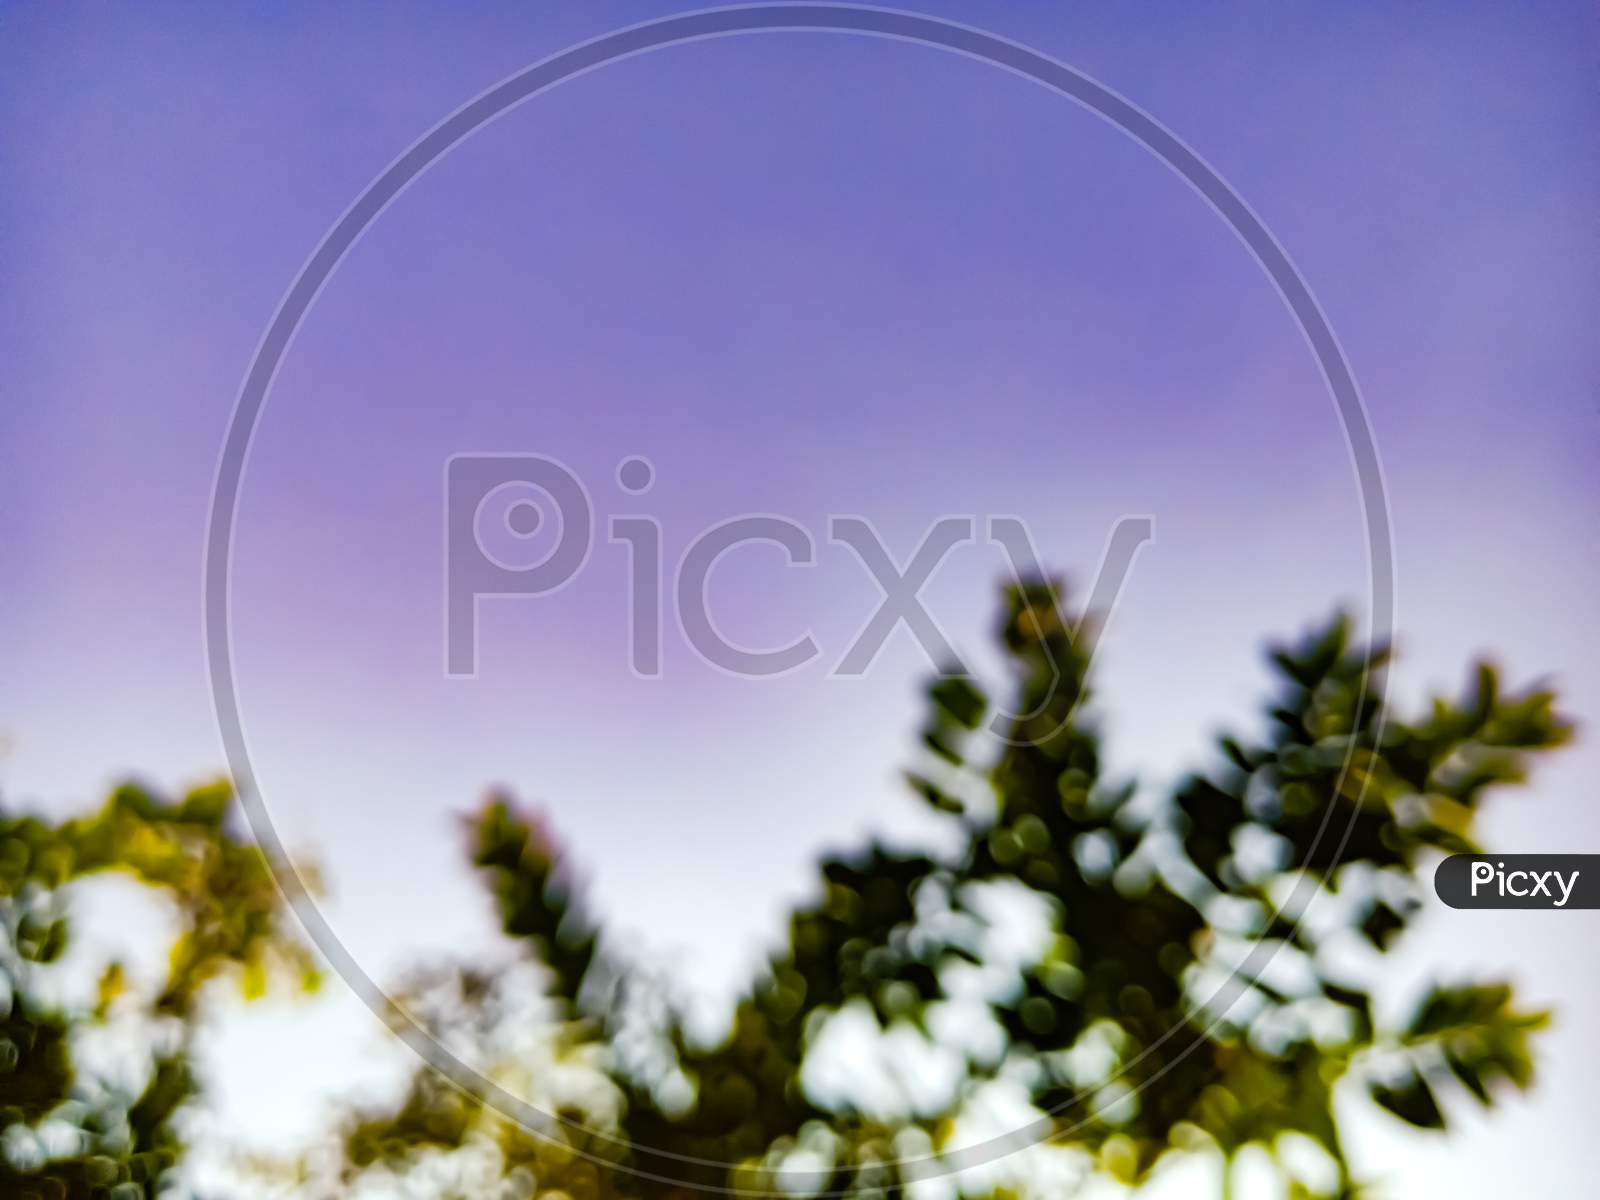 Natural Sky With Green Color Leaves Displayed Blur Background.